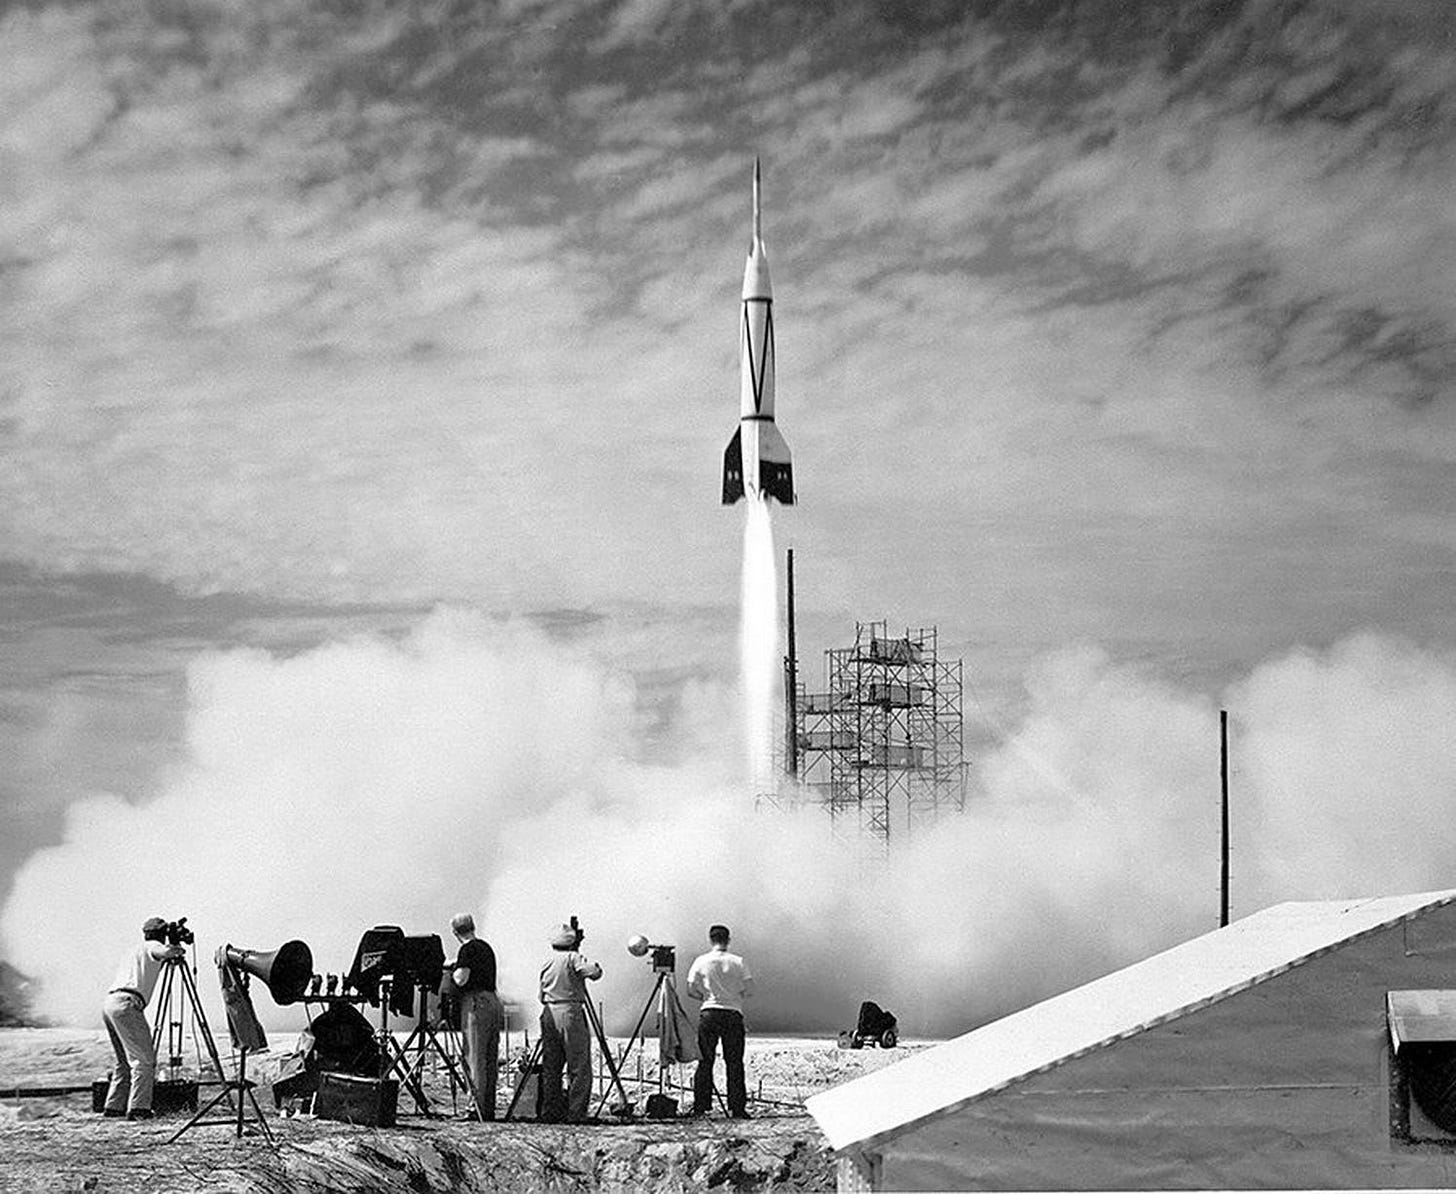 The Bumper V2 rocket at Cape Canaveral in 1950: one of the products of Operation Paperclip